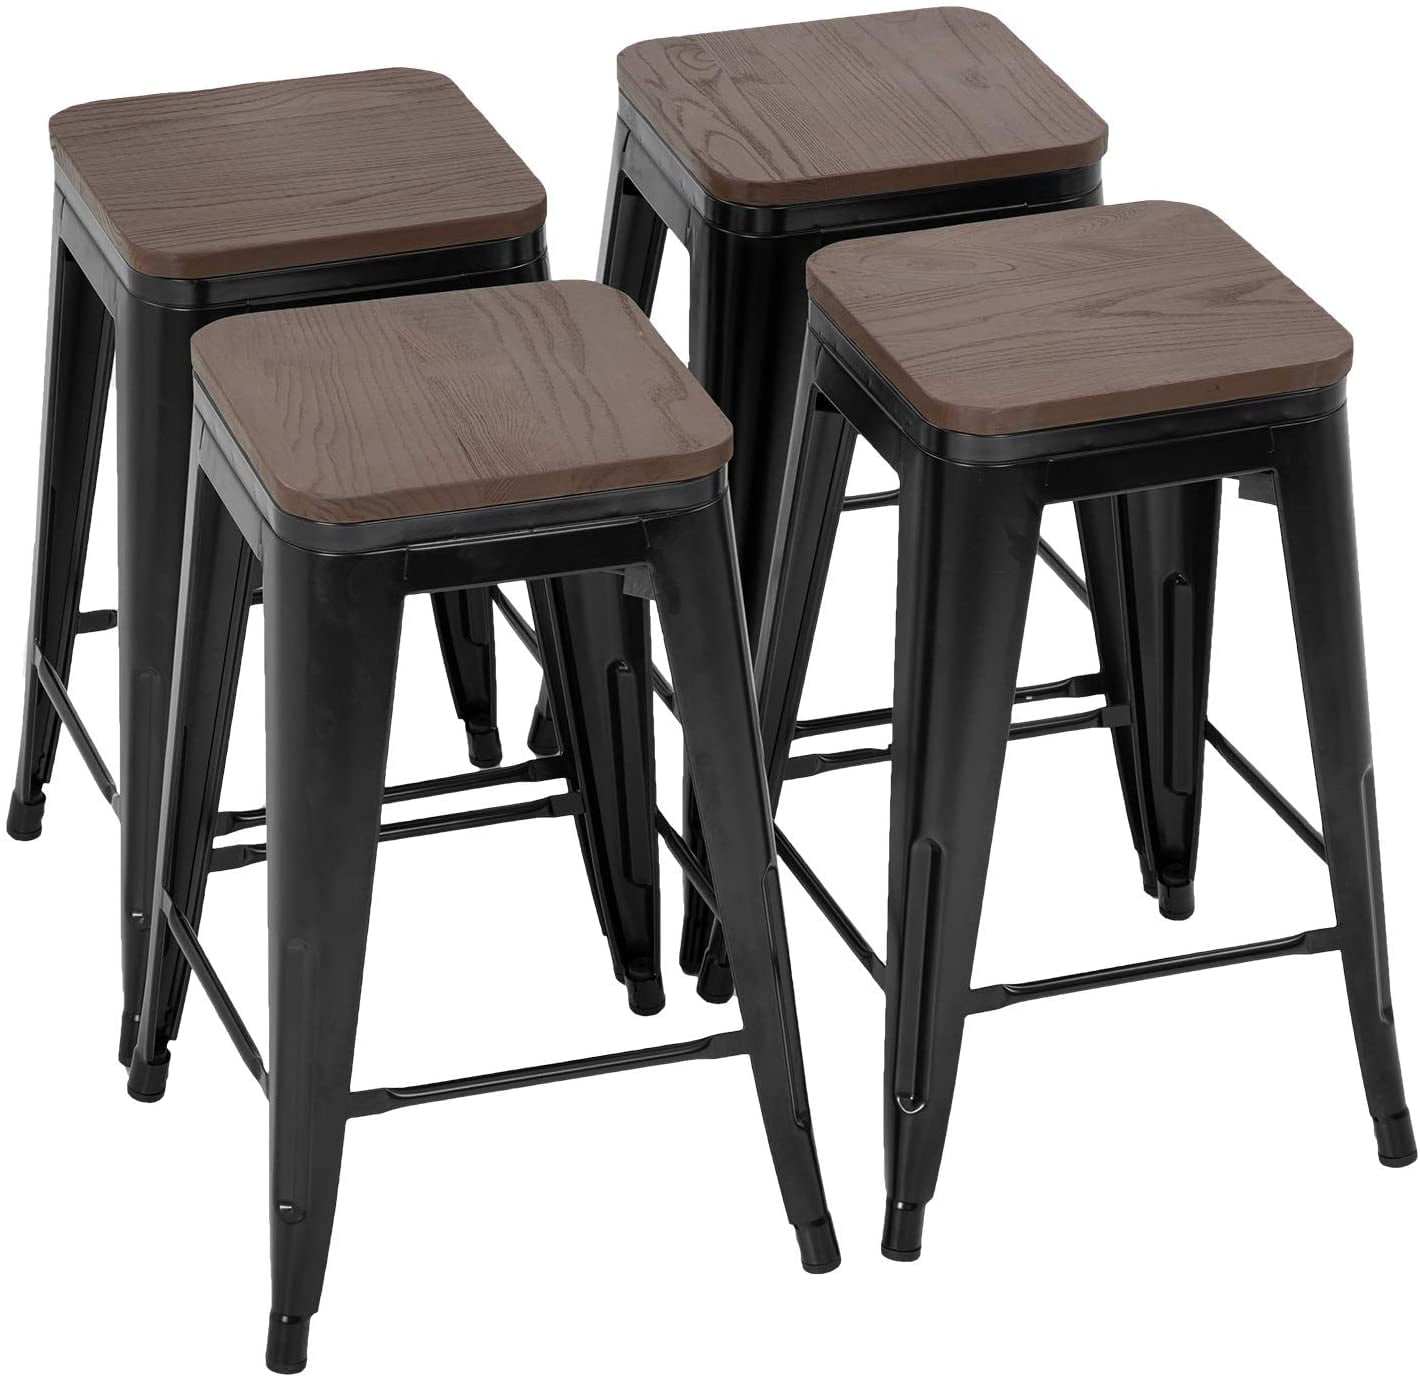 24 Inches Metal Bar Stools Set Of 4, Outdoor Bar Stools 24 Inch Seat Height